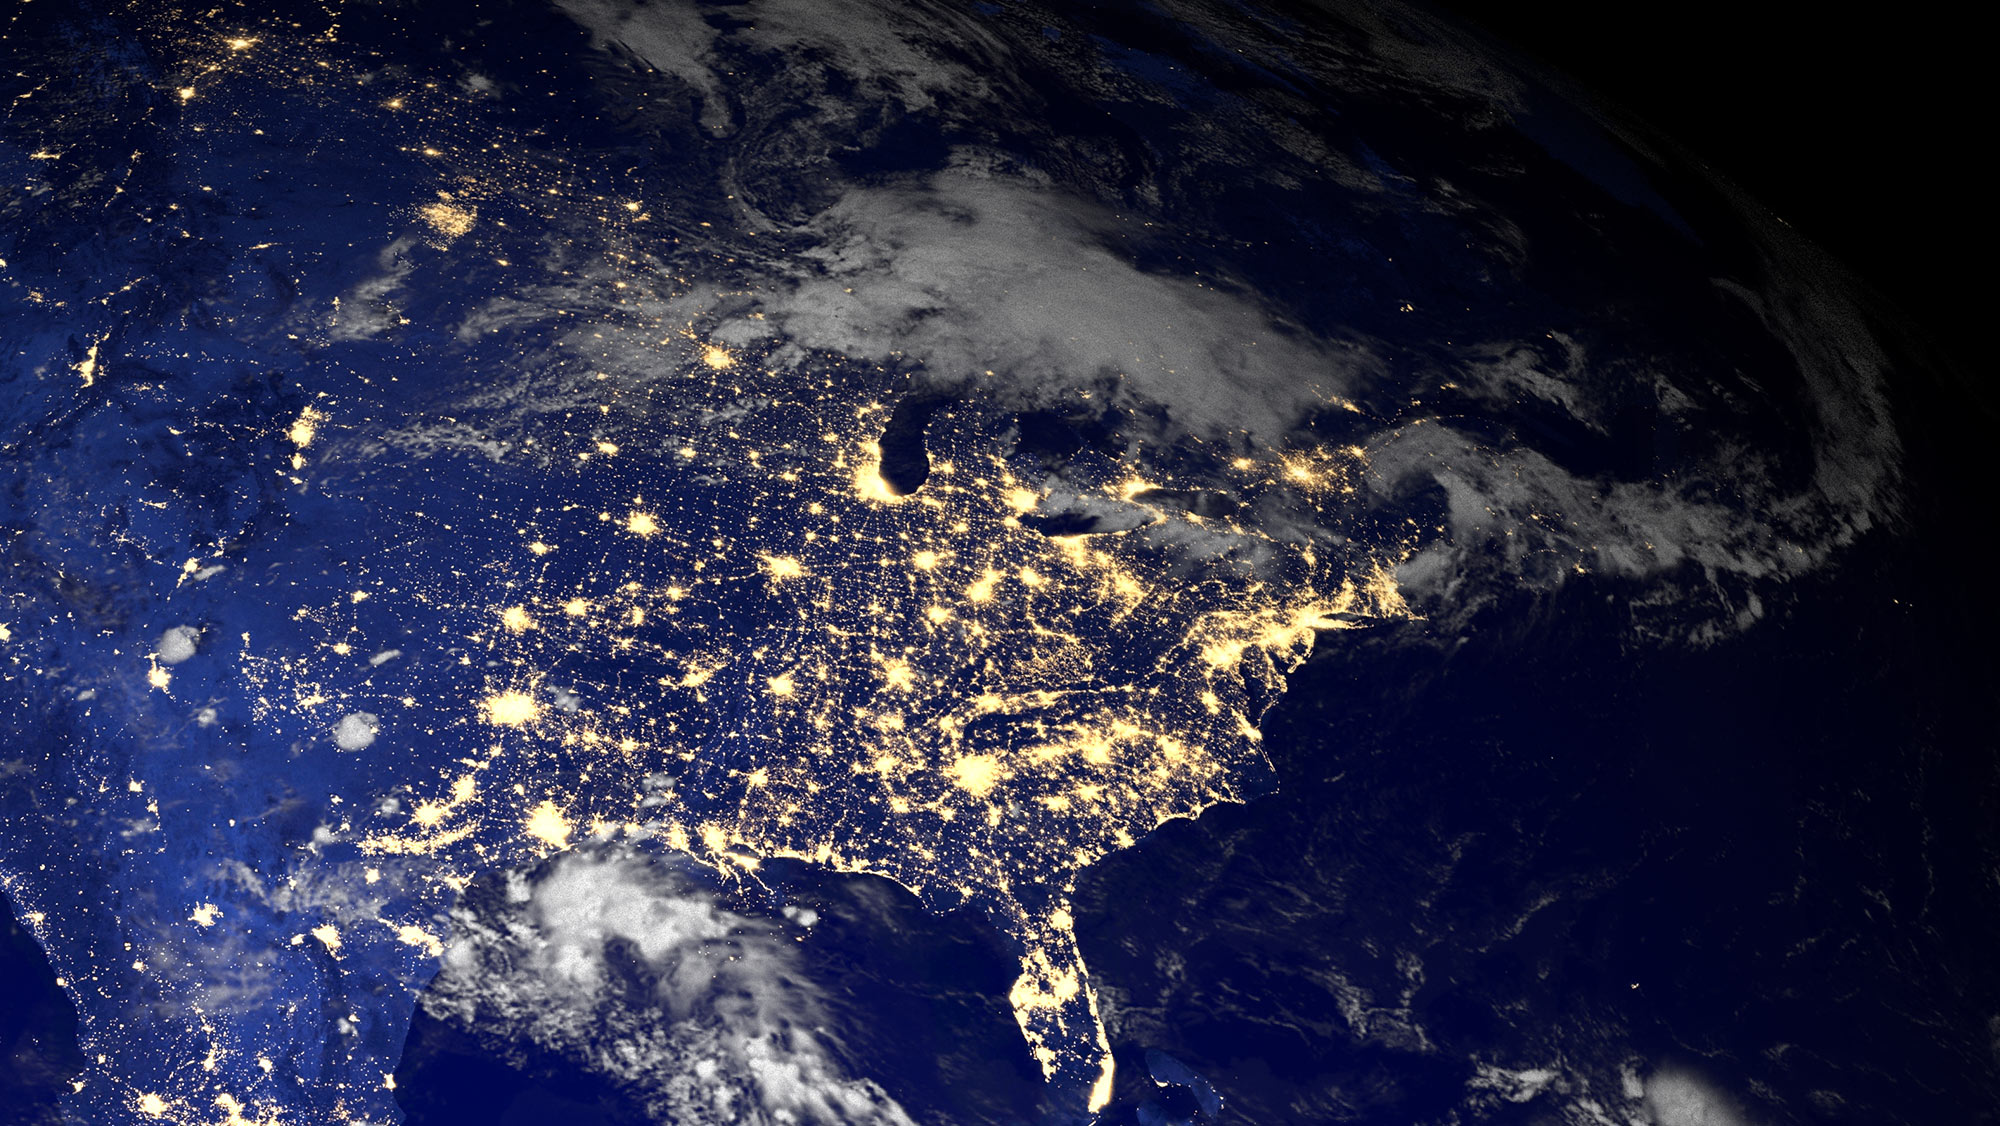 Outer space shot of America with city lights.